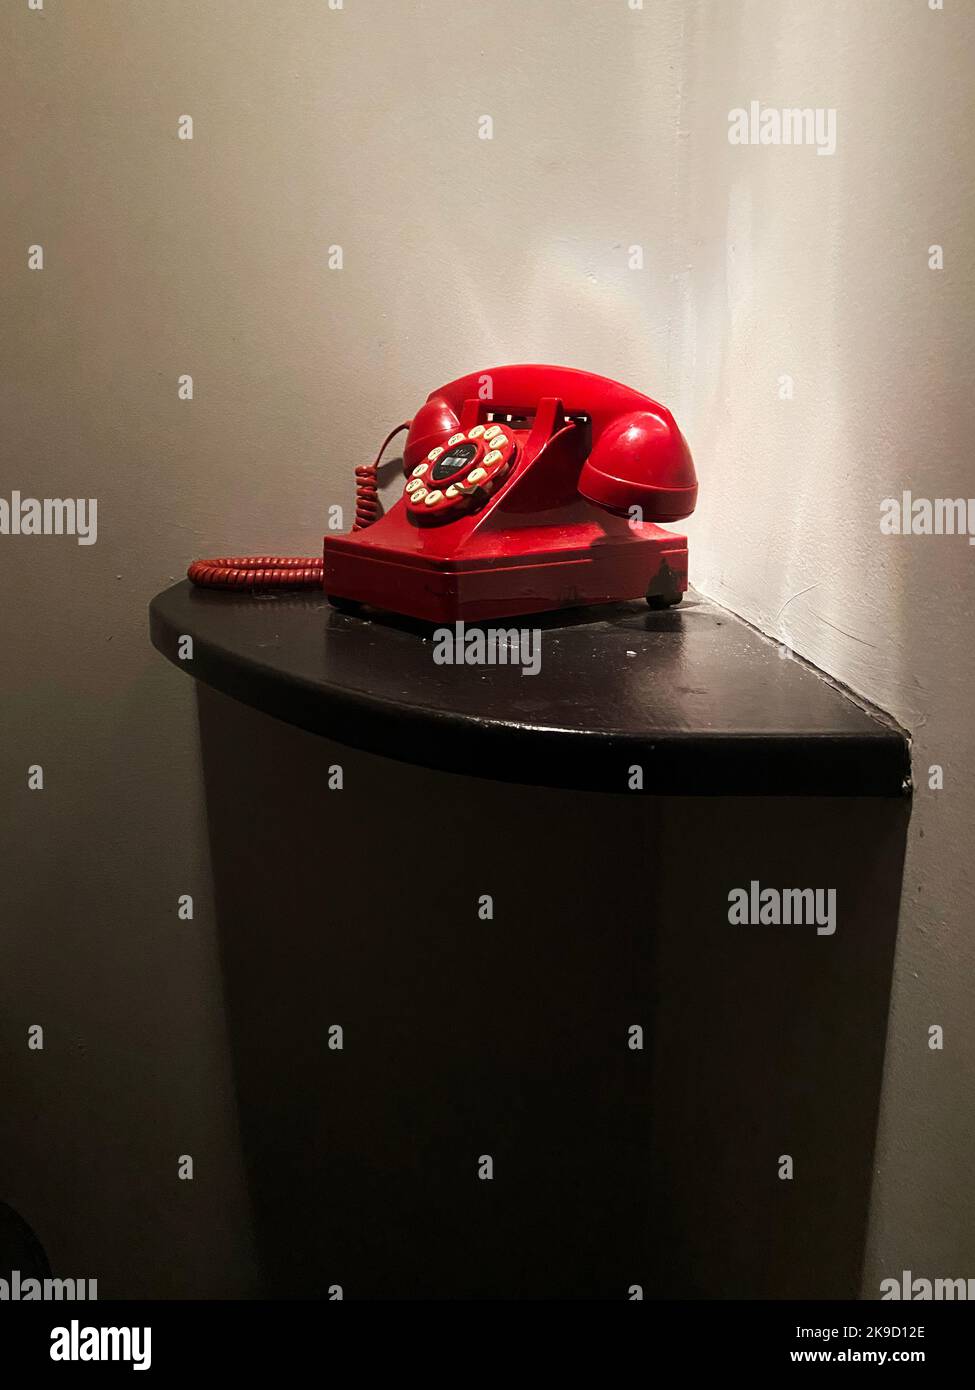 A red phone on a table. Emergency telephone. Stock Photo